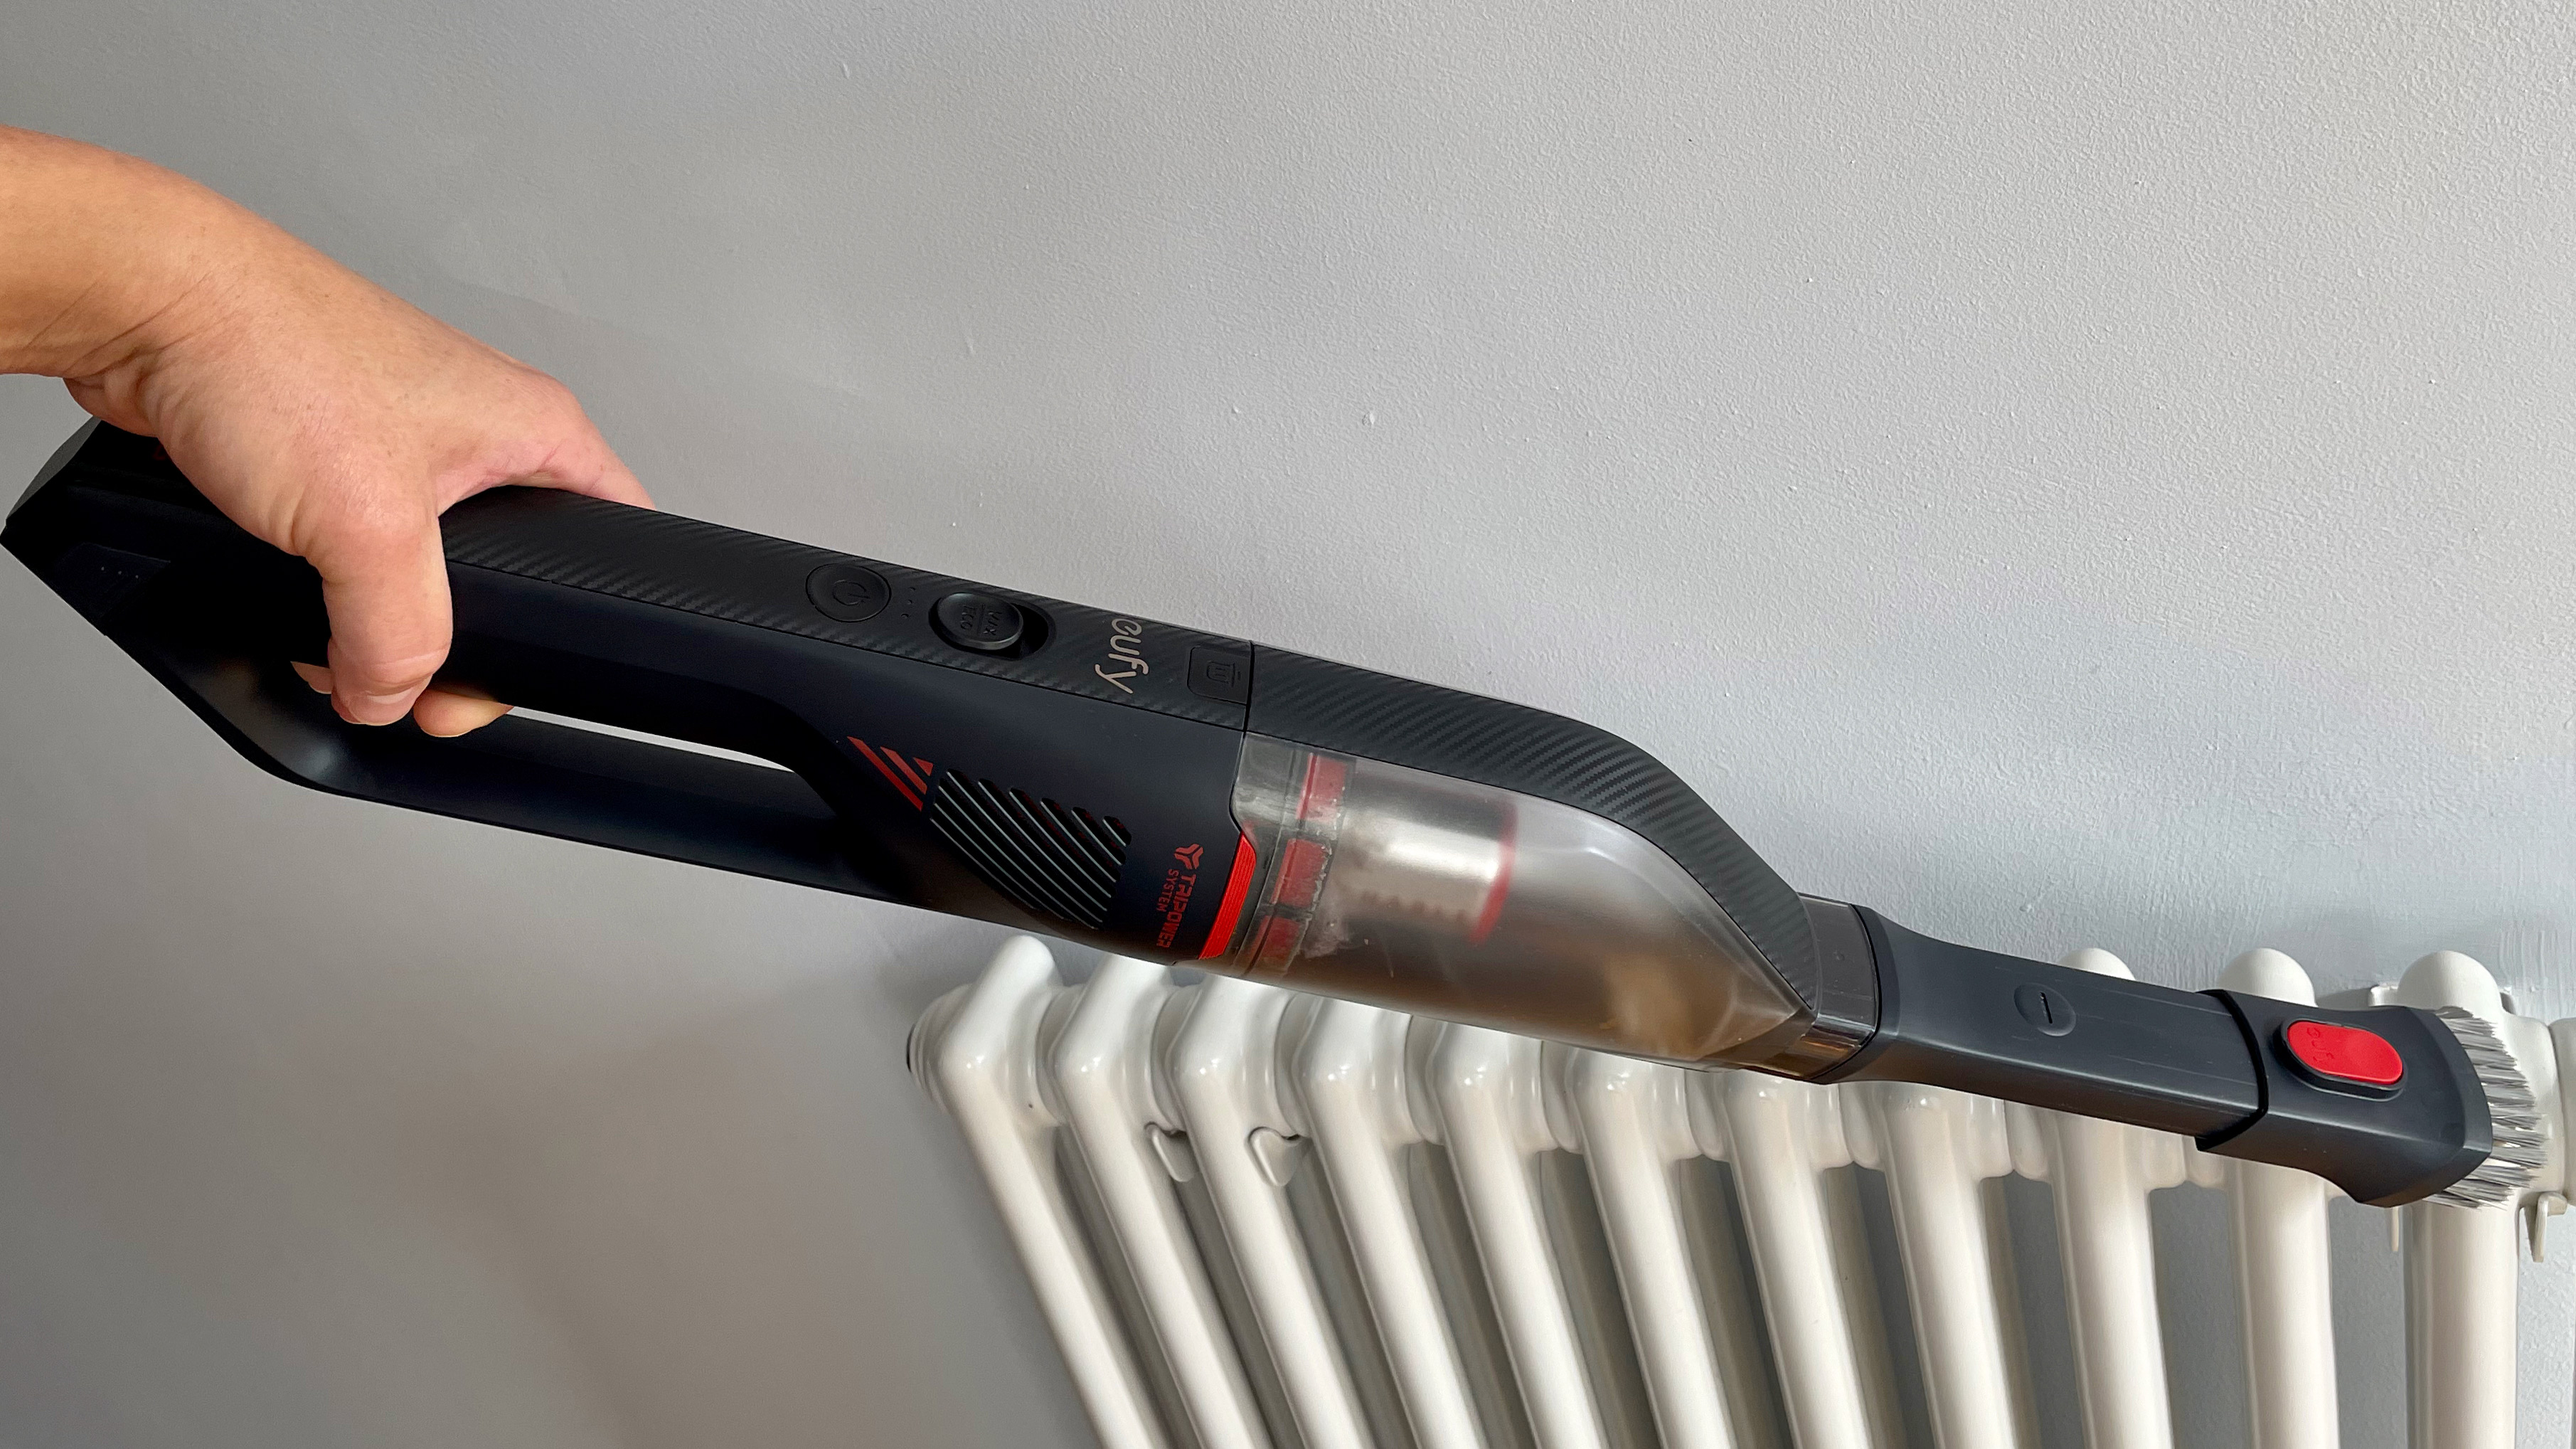 The Eufy HomeVac H30 Mate being used to clean dust from a radiator